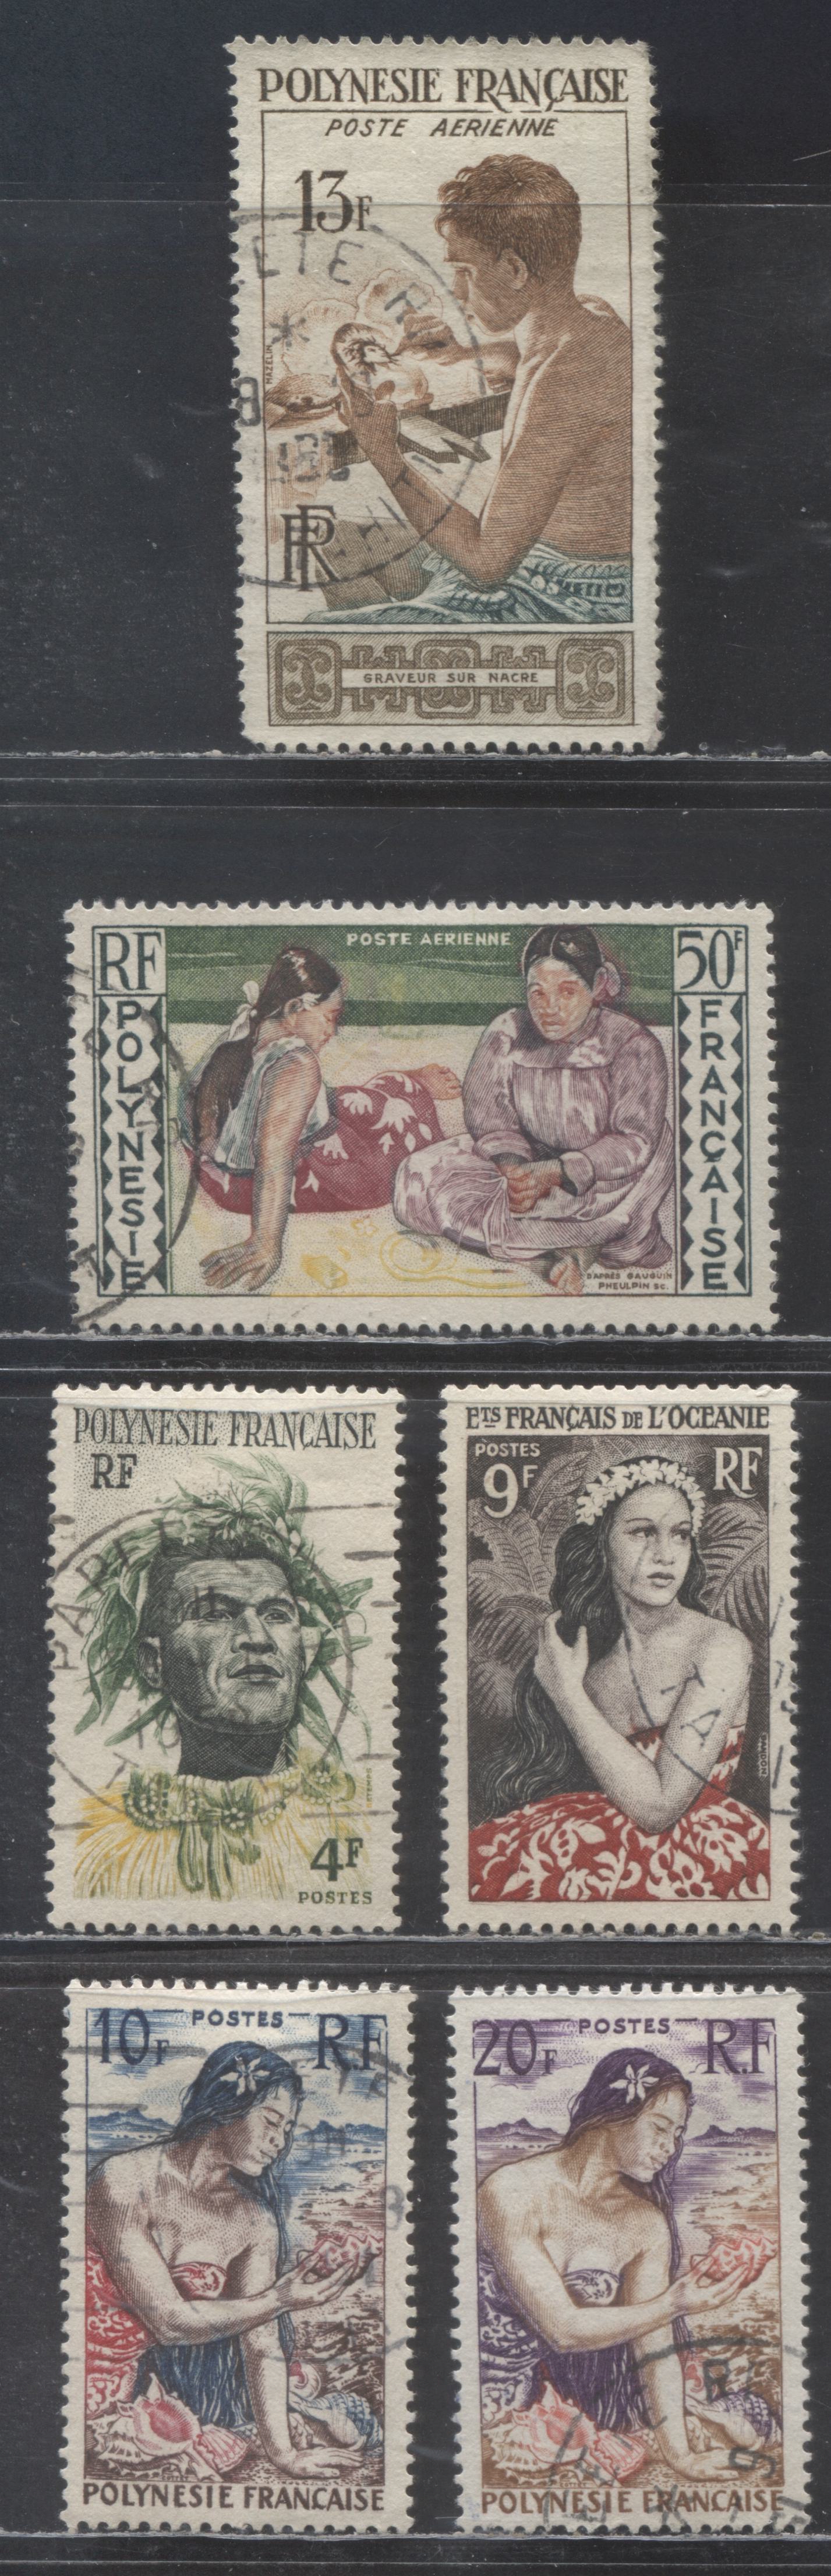 Lot 9 French Oceania SC#180/C25 1955-1958 Girl Of Bora-Bora - Airmail Issues, 6 VFOG & Used Singles, Click on Listing to See ALL Pictures, 2022 Scott Cat. $24.5